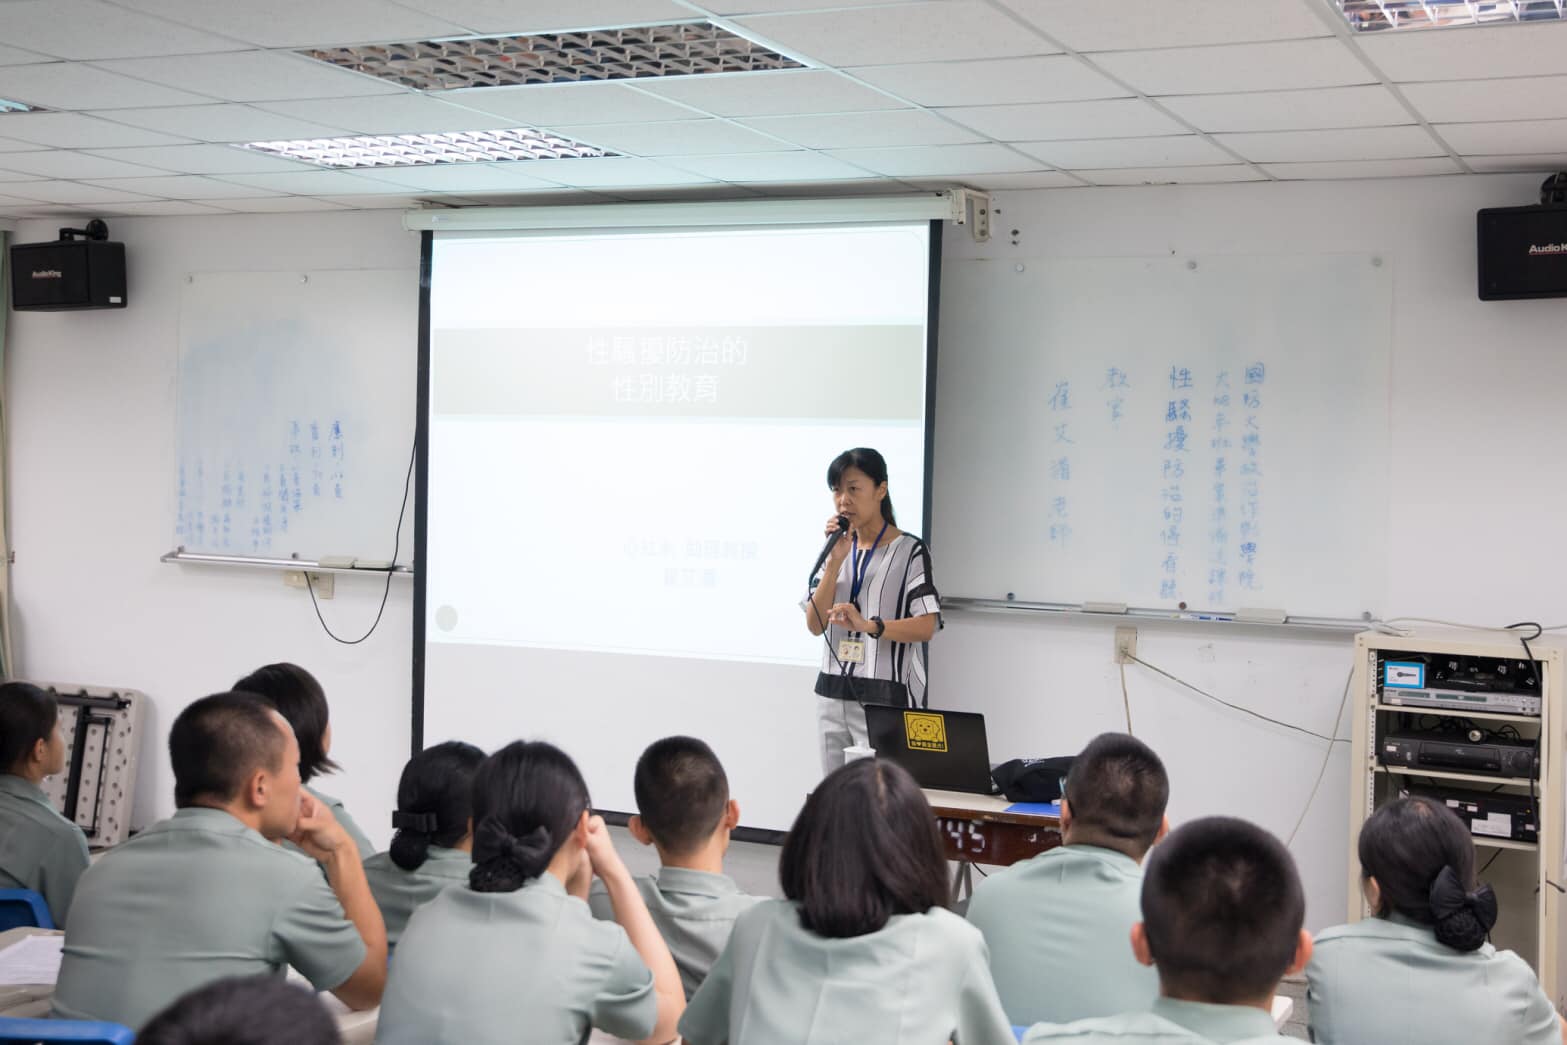 Teacher Tsui gives lectures about sexual harassment.